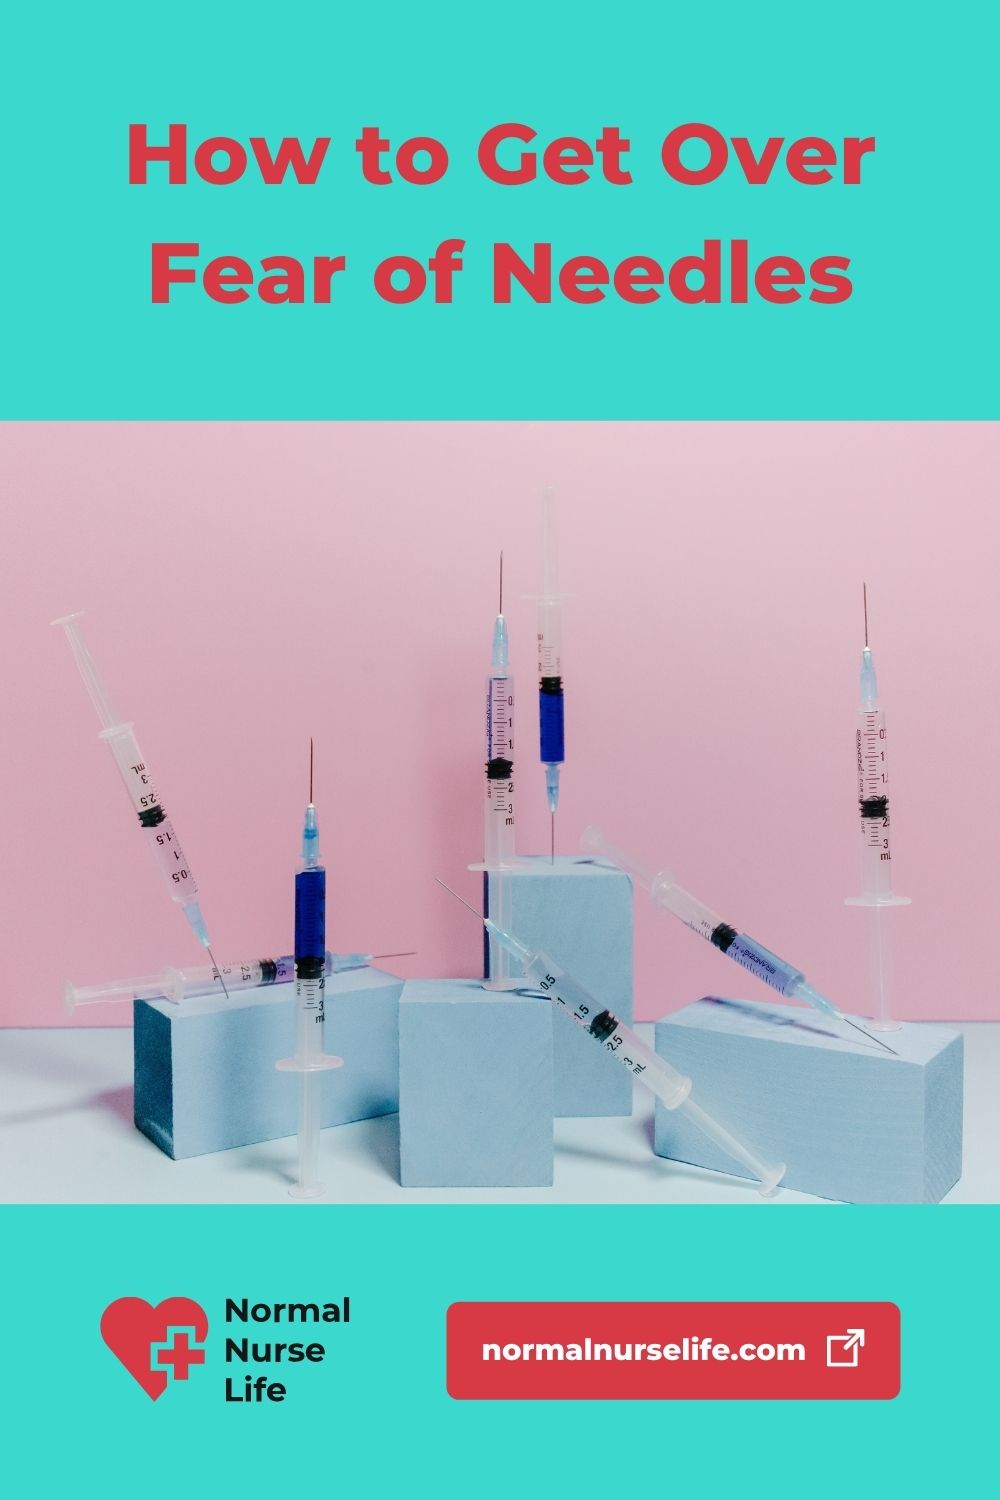 How to get over fear of needles